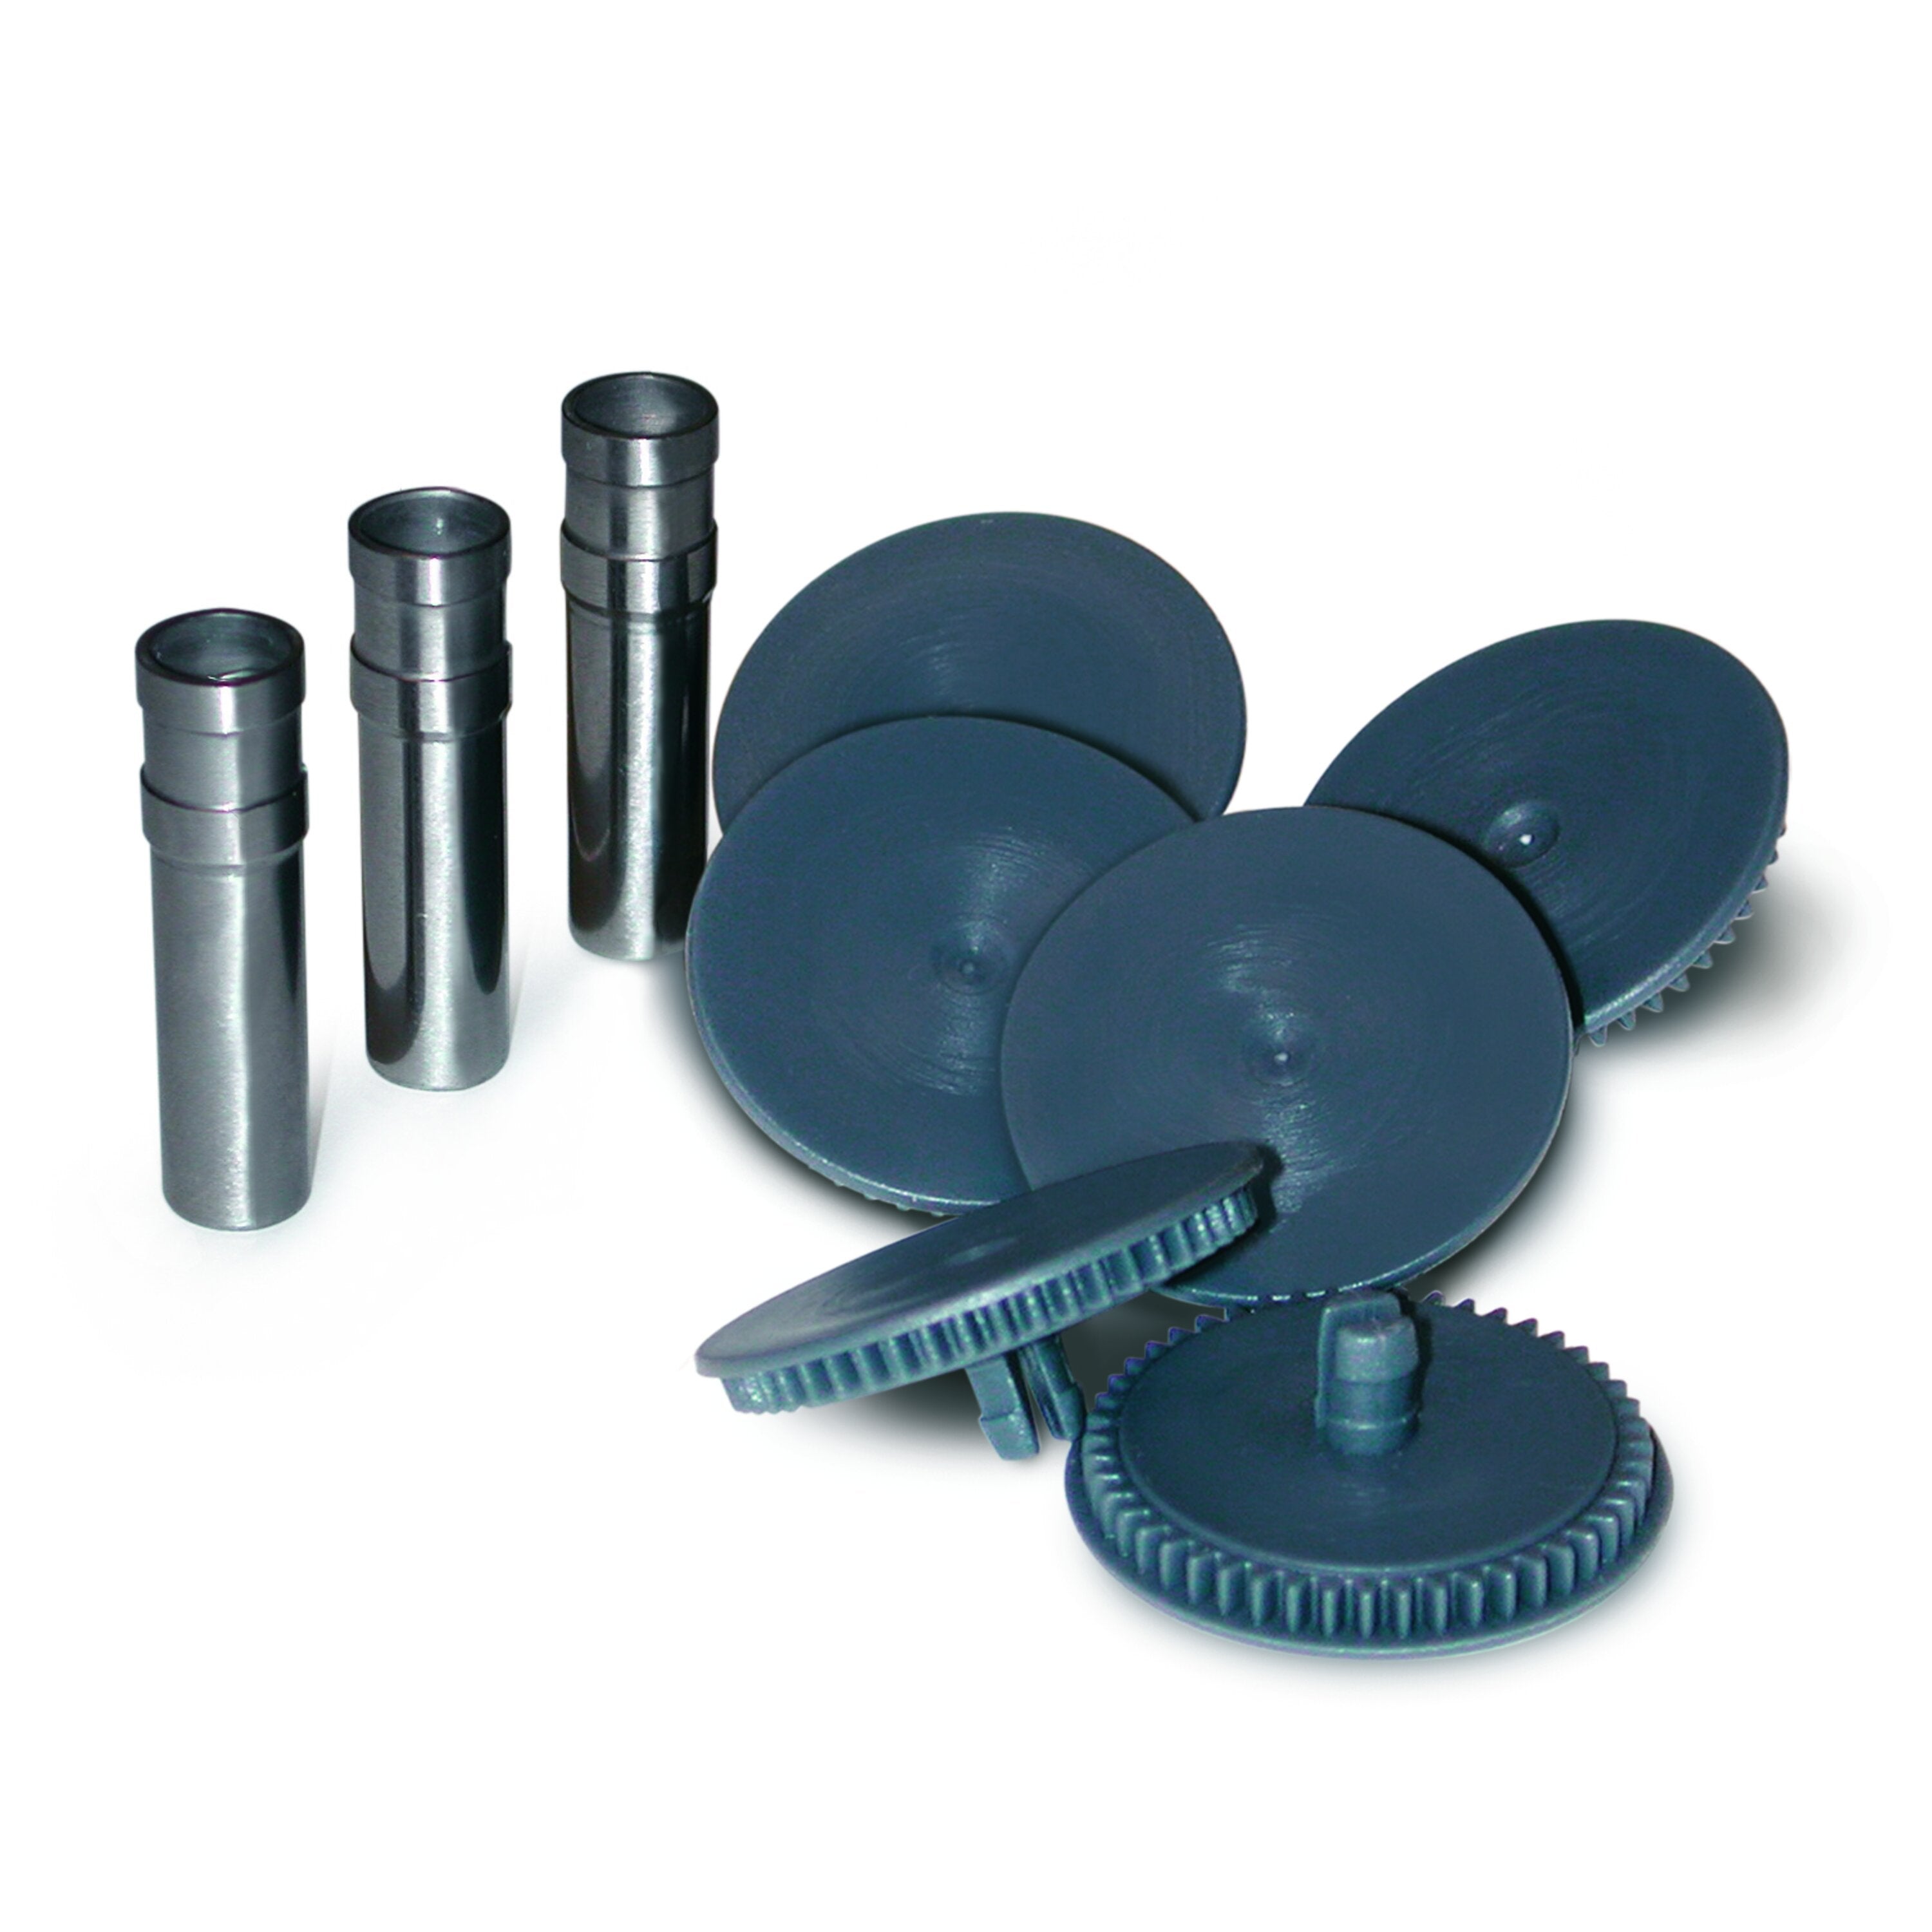 Swingline® Replacement Punch Kit for A7074650, 9/32" - 3 Punch Heads & 6 Discs